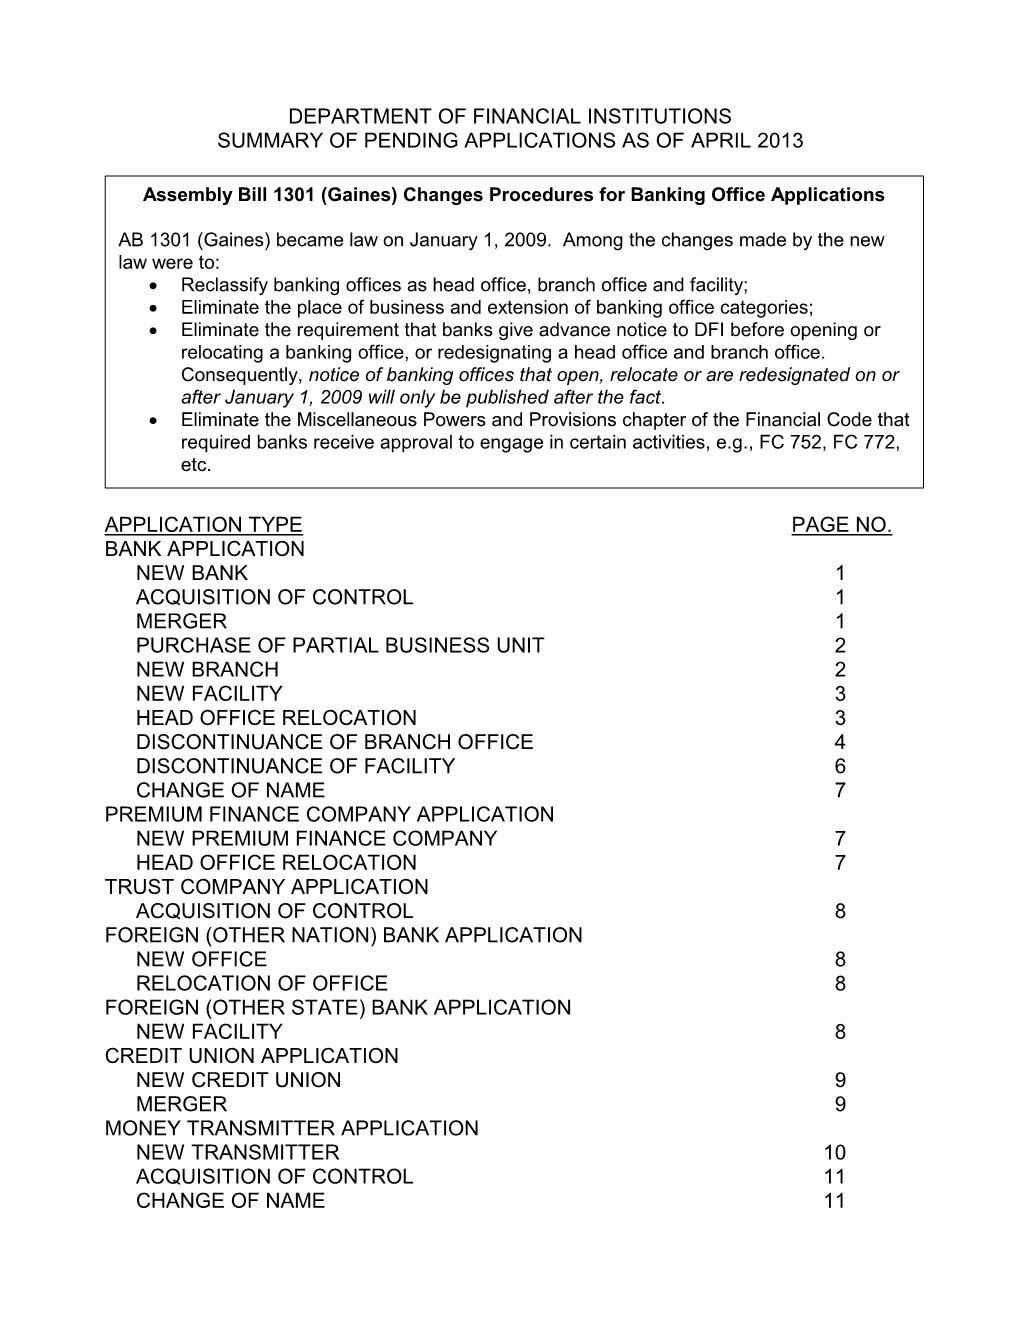 Department of Financial Institutions Summary of Pending Applications As of April 2013